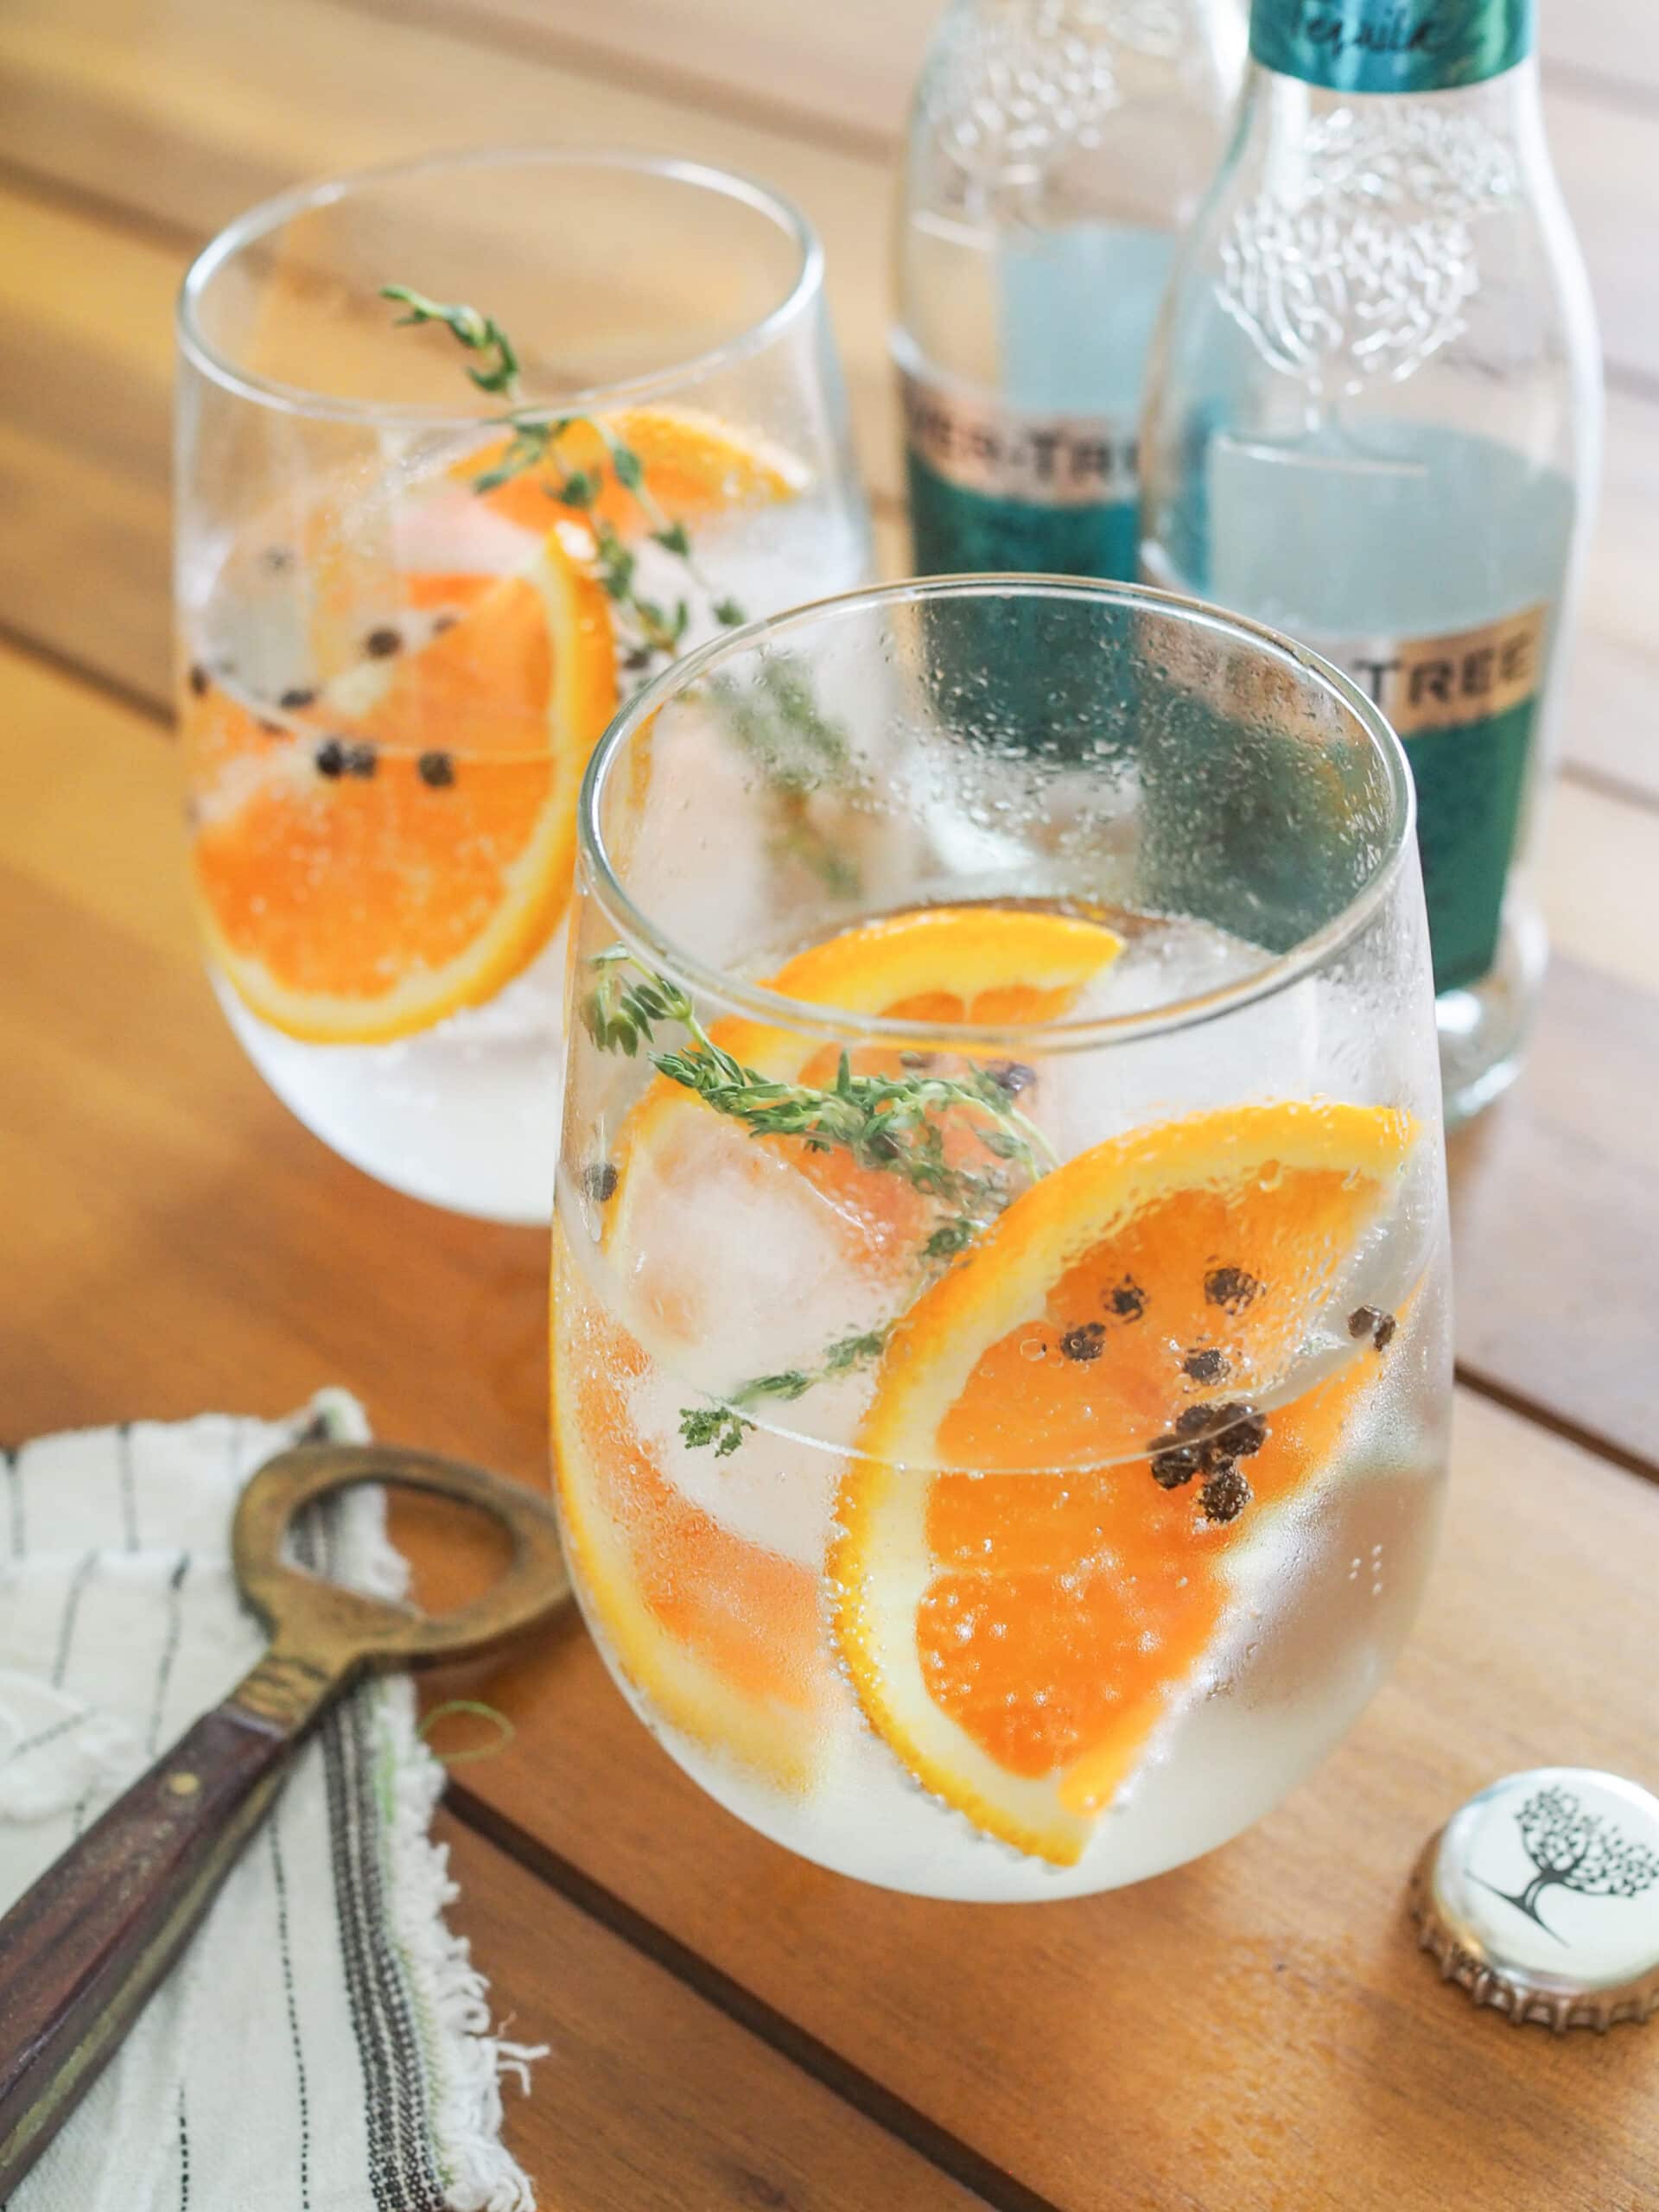 How To  Build a Spanish Gin-Tonic